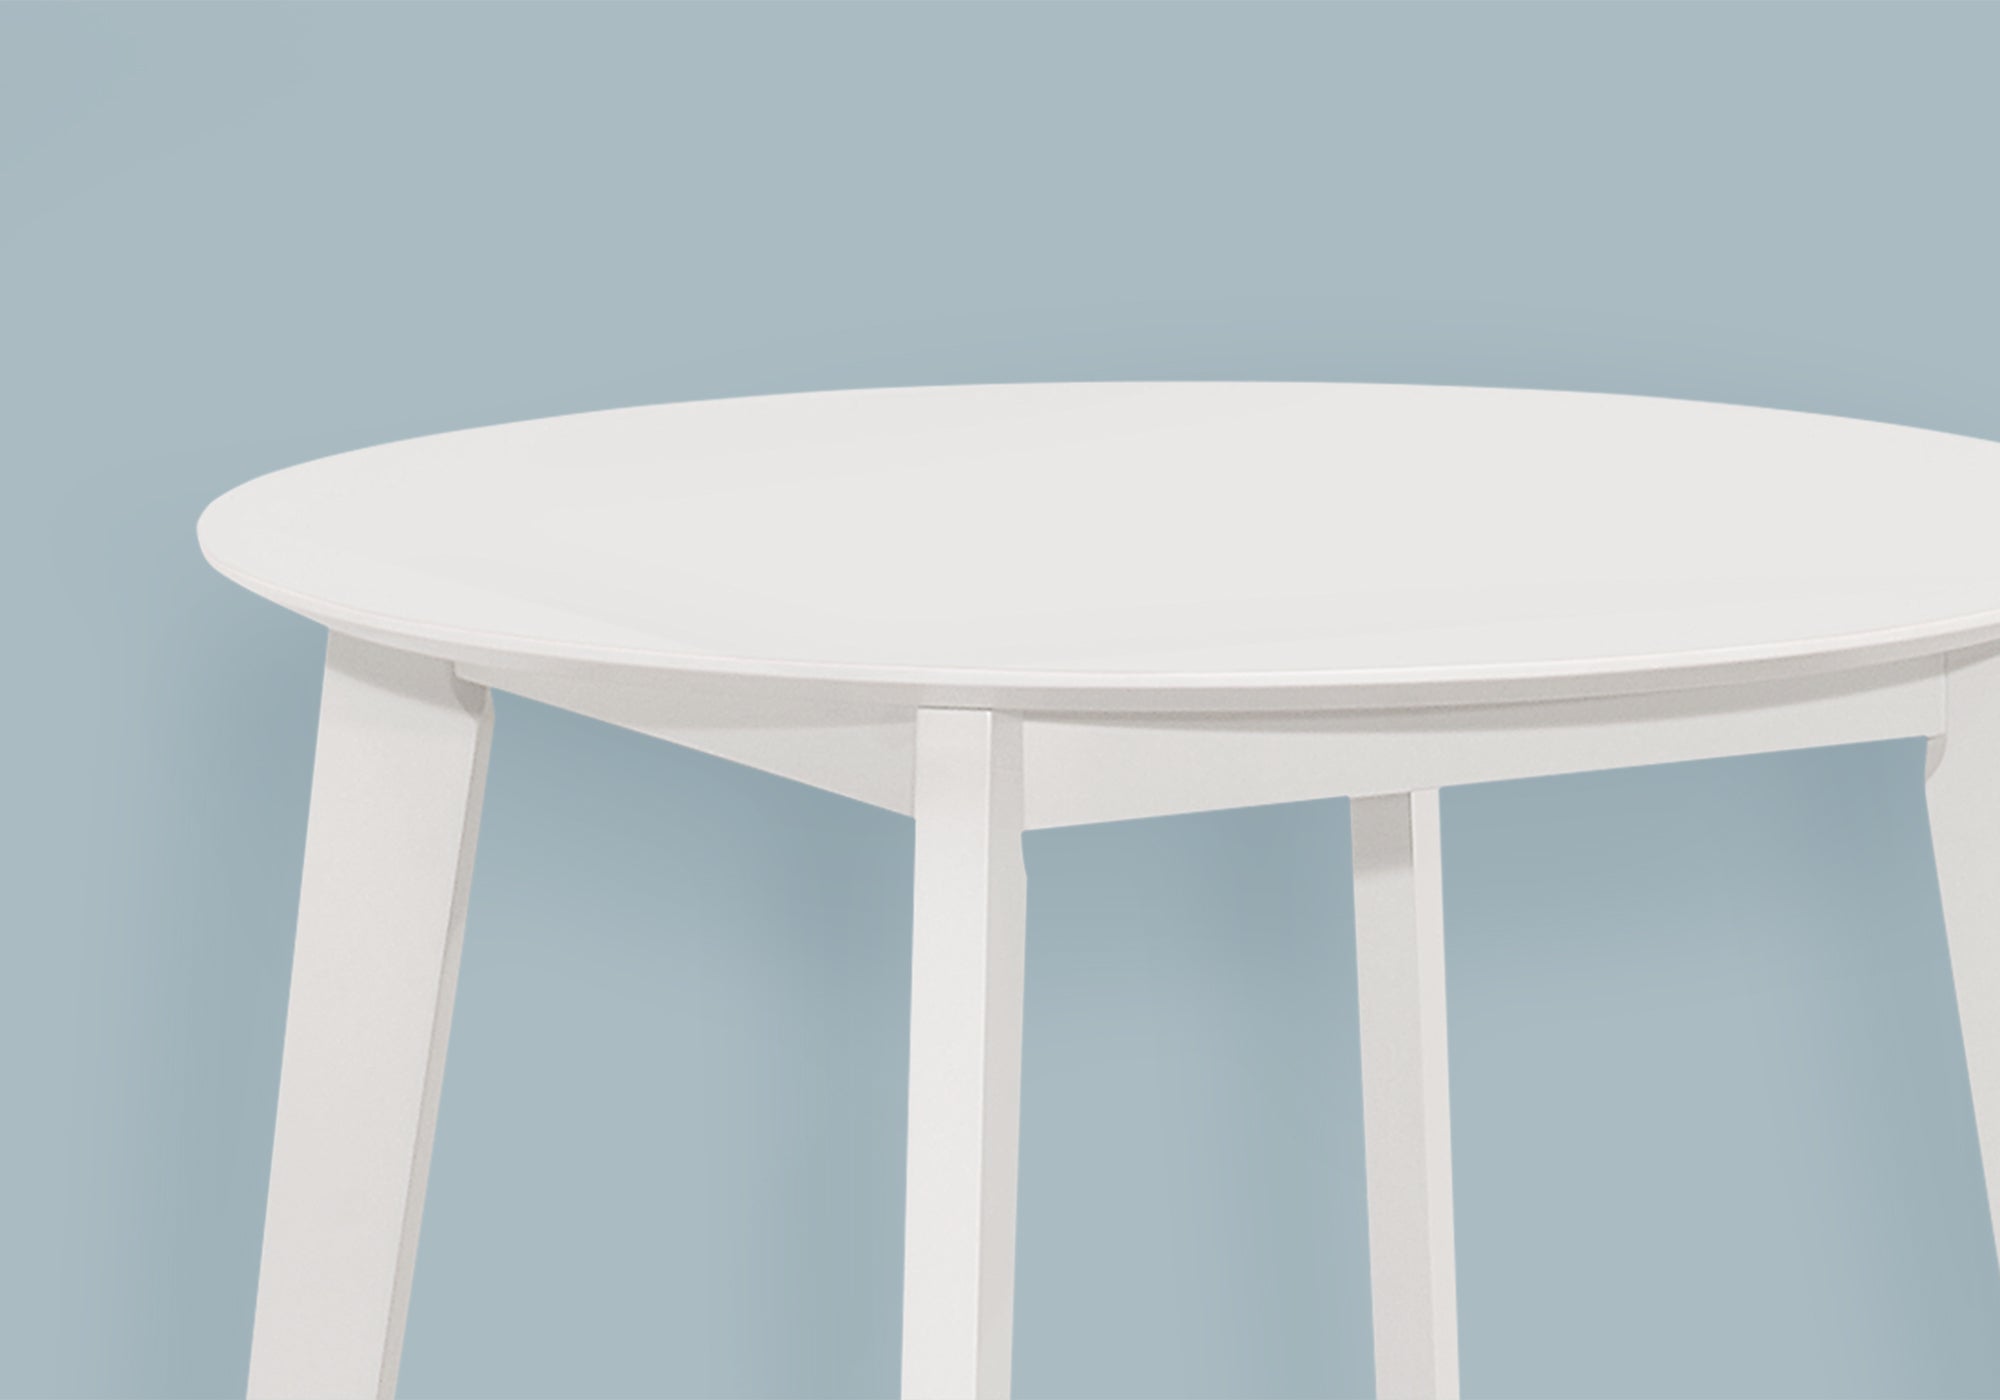 MN-201321    Dining Table, 30" Round, Small, Kitchen, Dining Room, White Veneer, Wood Legs, Transitional